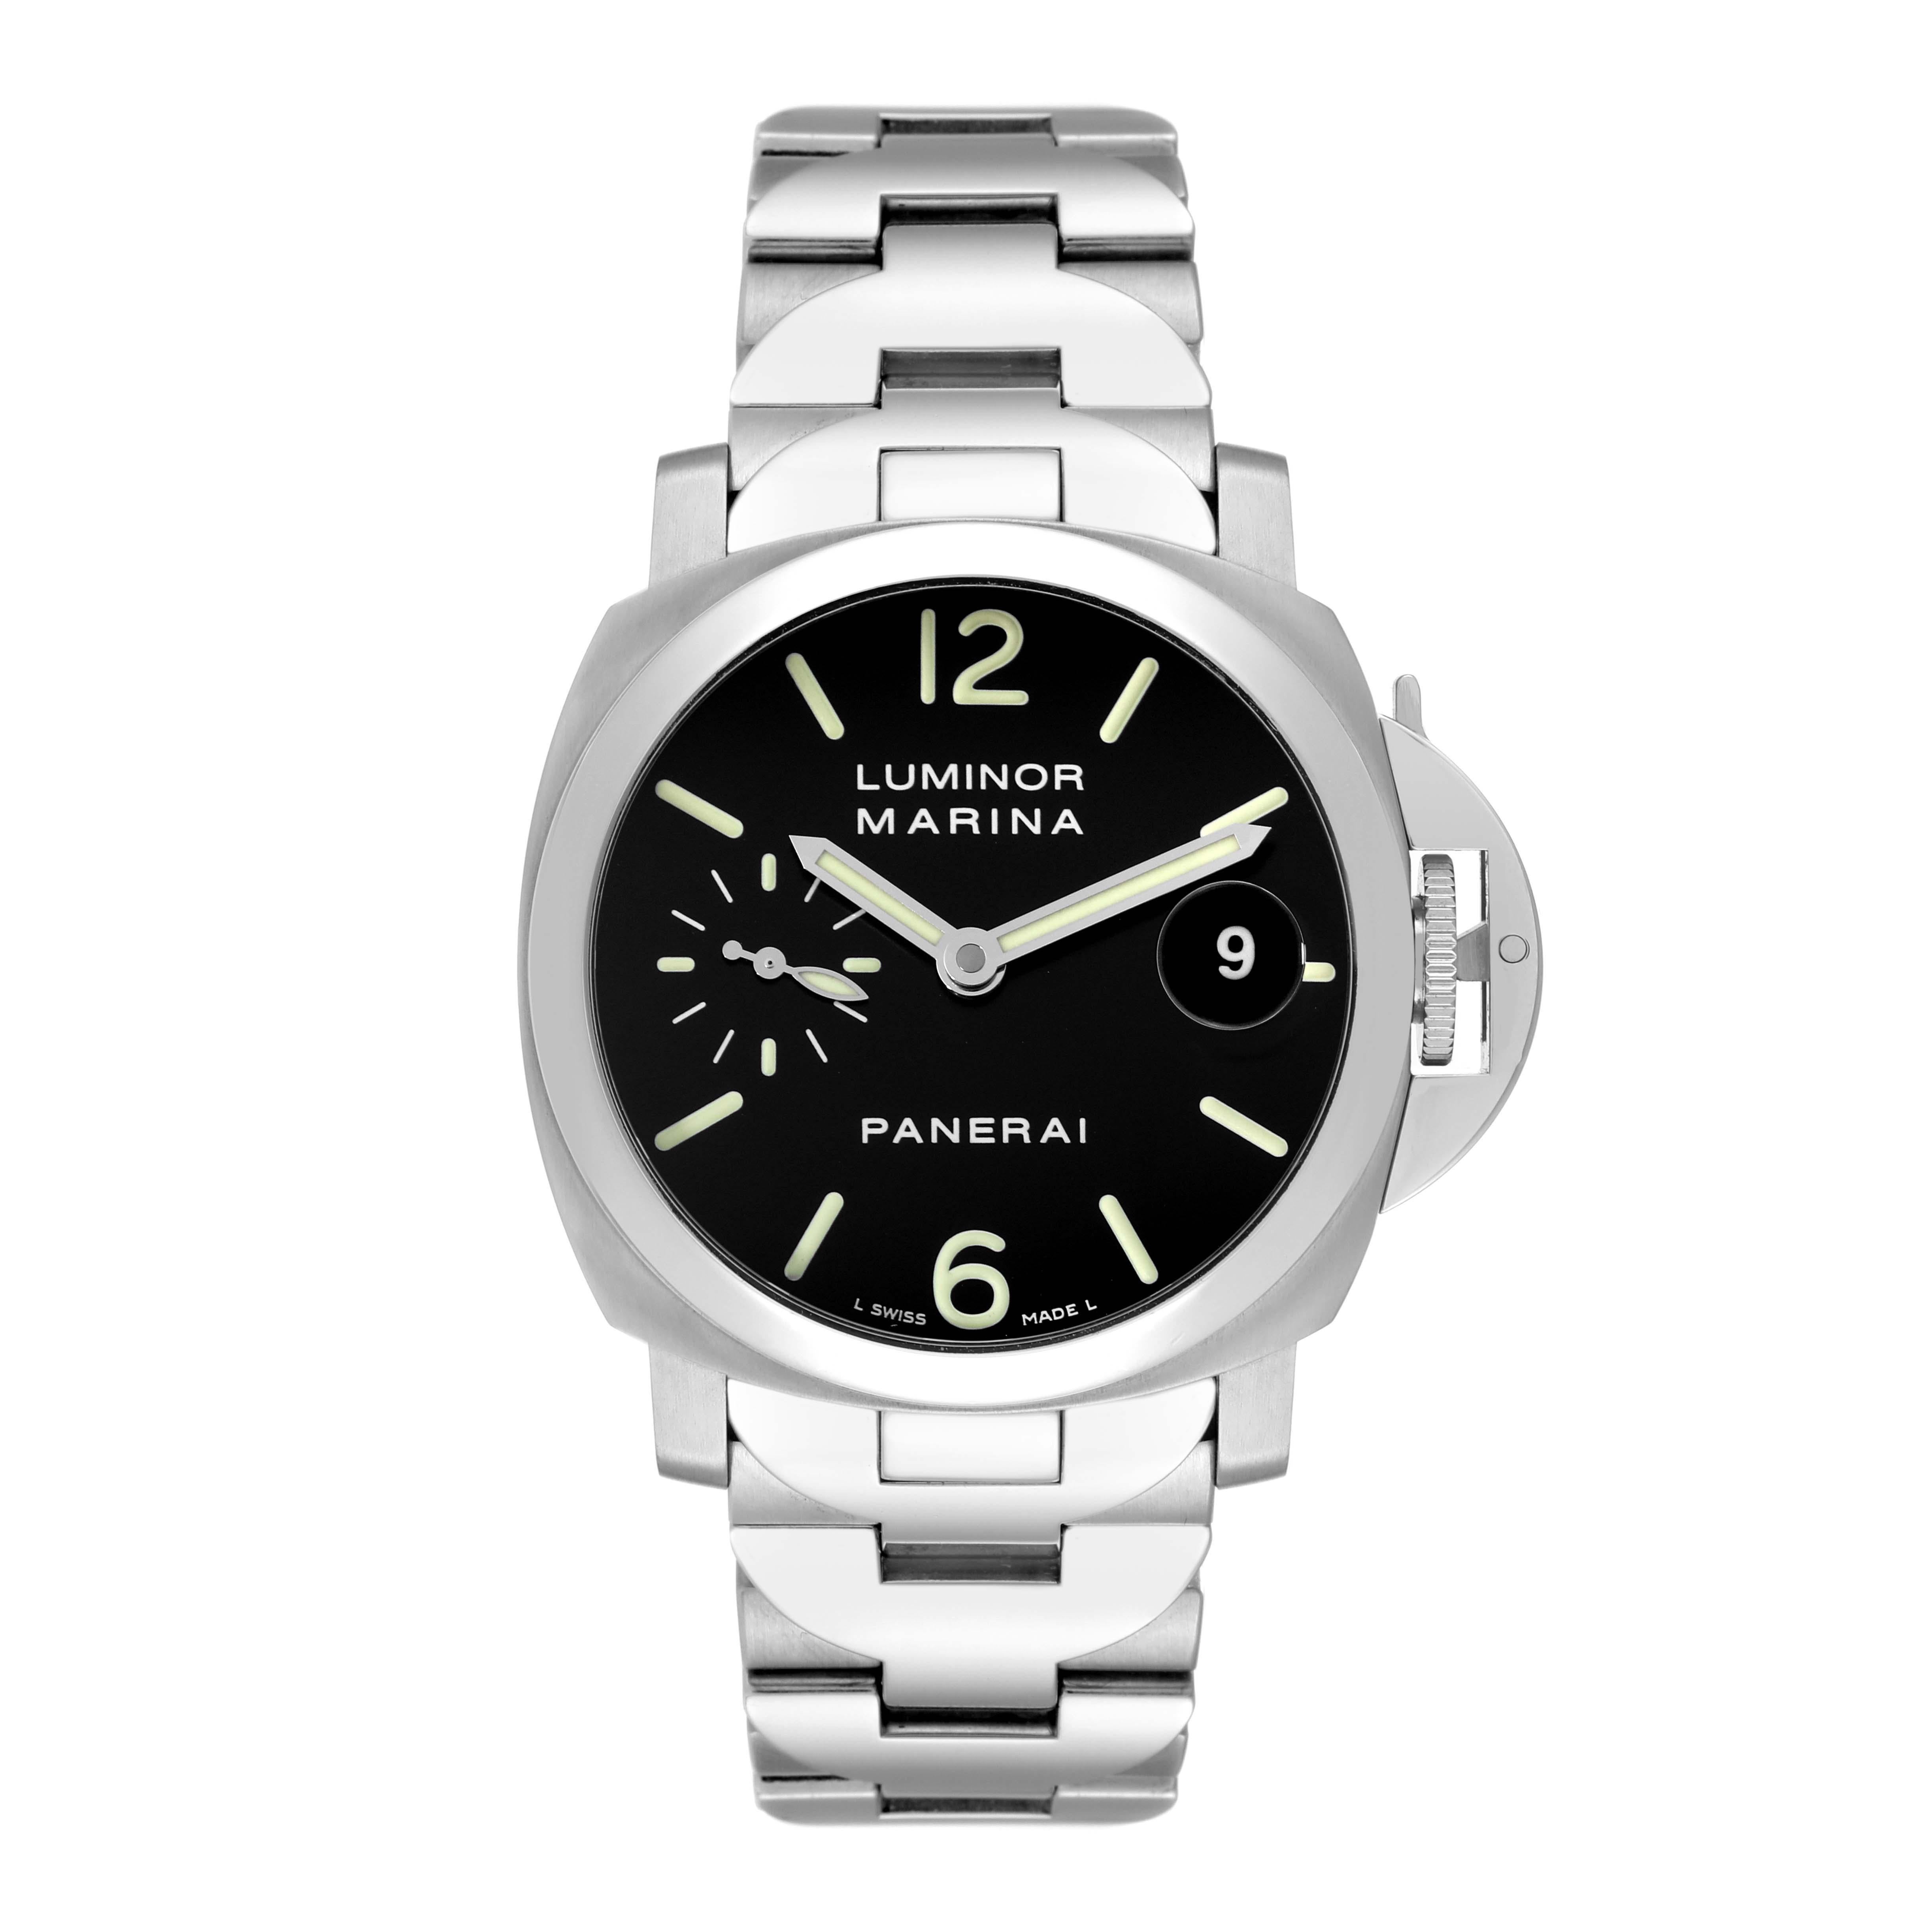 Panerai Luminor Marina Automatic 40mm Steel Mens Watch PAM00050 Box Card. Automatic self-winding movement. Two part cushion shaped stainless steel case 40 mm in diameter. Case thickness 15.4mm.  Panerai patented crown protector. Polished stainless